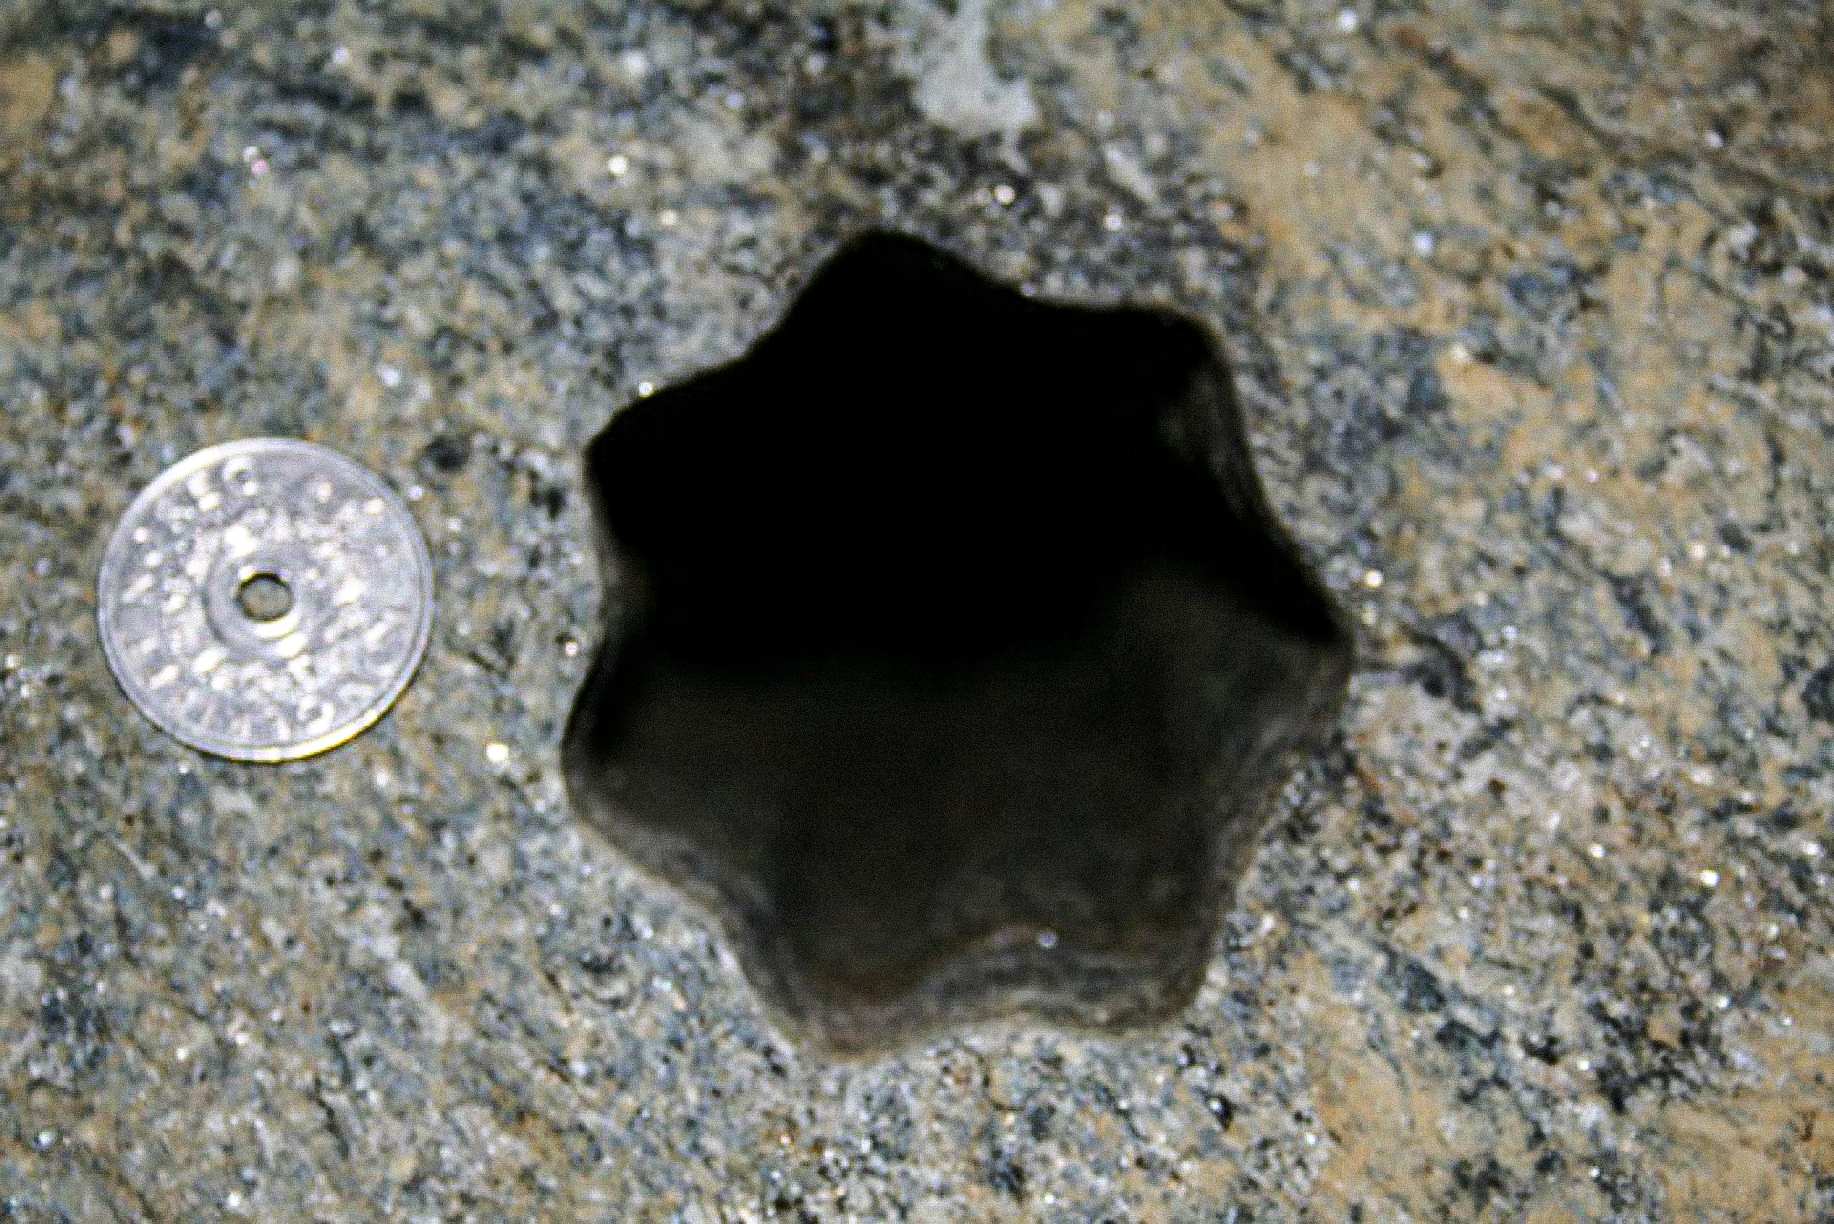 This star-shaped hole (with seven sides) was found by contractors on Friday November 30, 2007 in Volda, Norway.the Norwegian 5 - kroner coin is 25 mm in diameter. The hole is approx 65 - 70 mm in diameter.